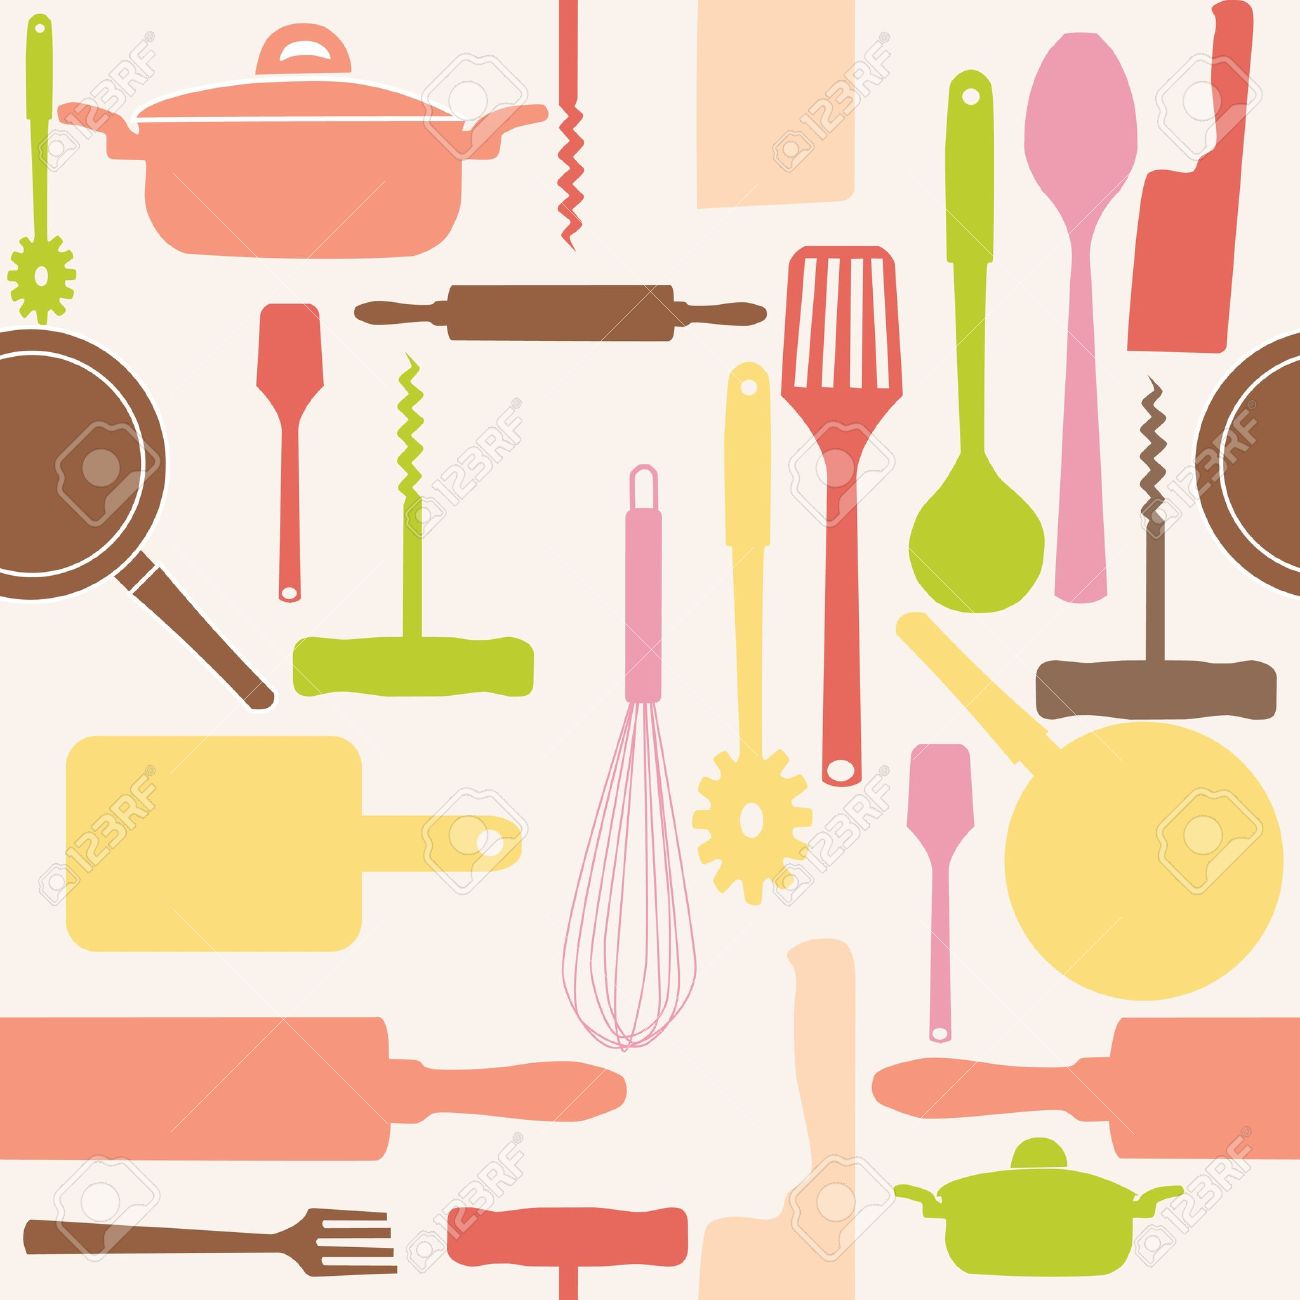 Cooking Utensils Clipart Free